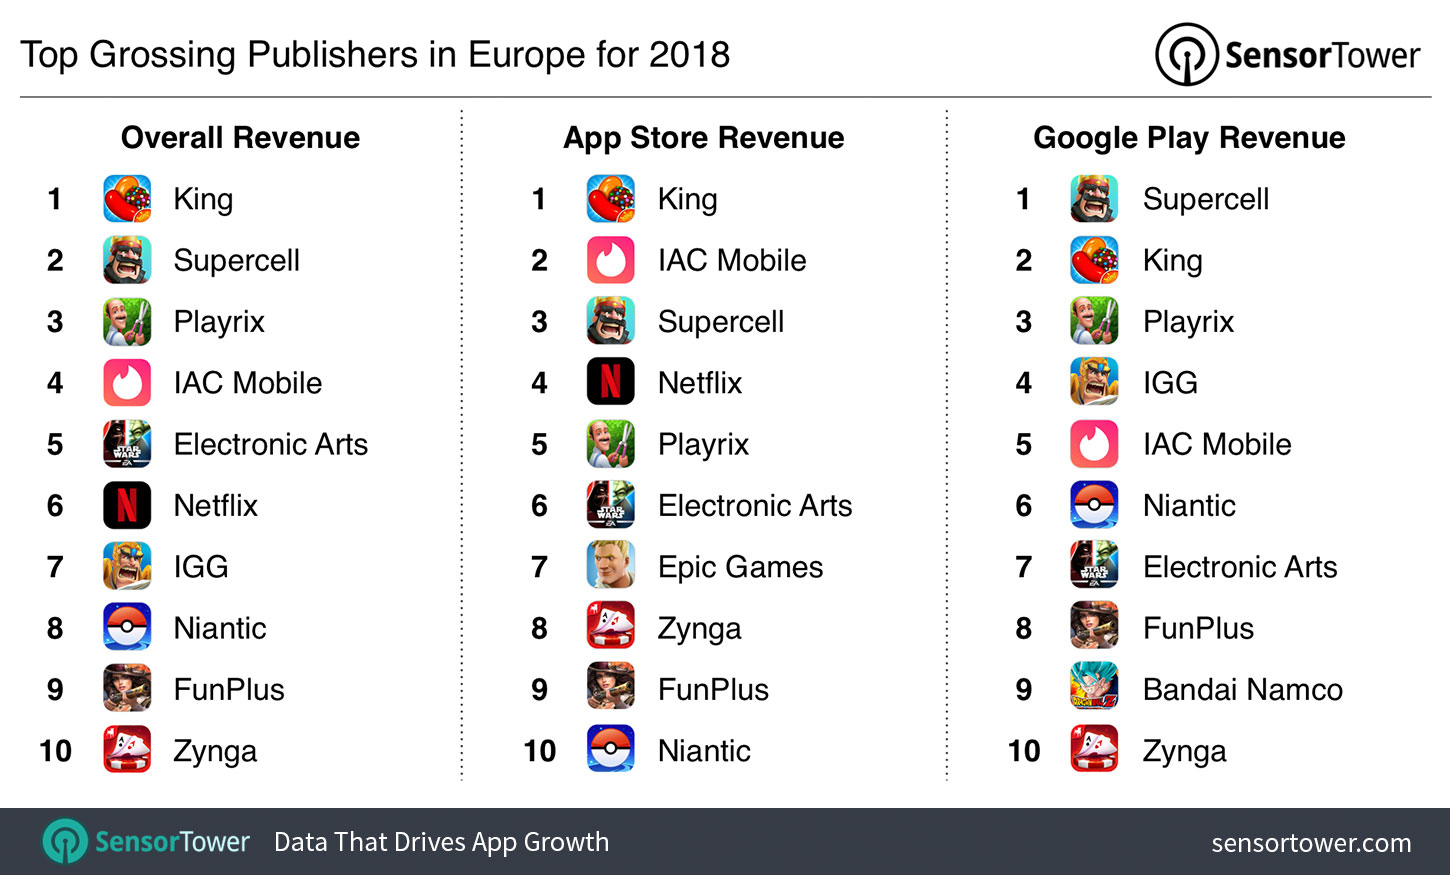 Top Grossing Publishers in Europe for 2018